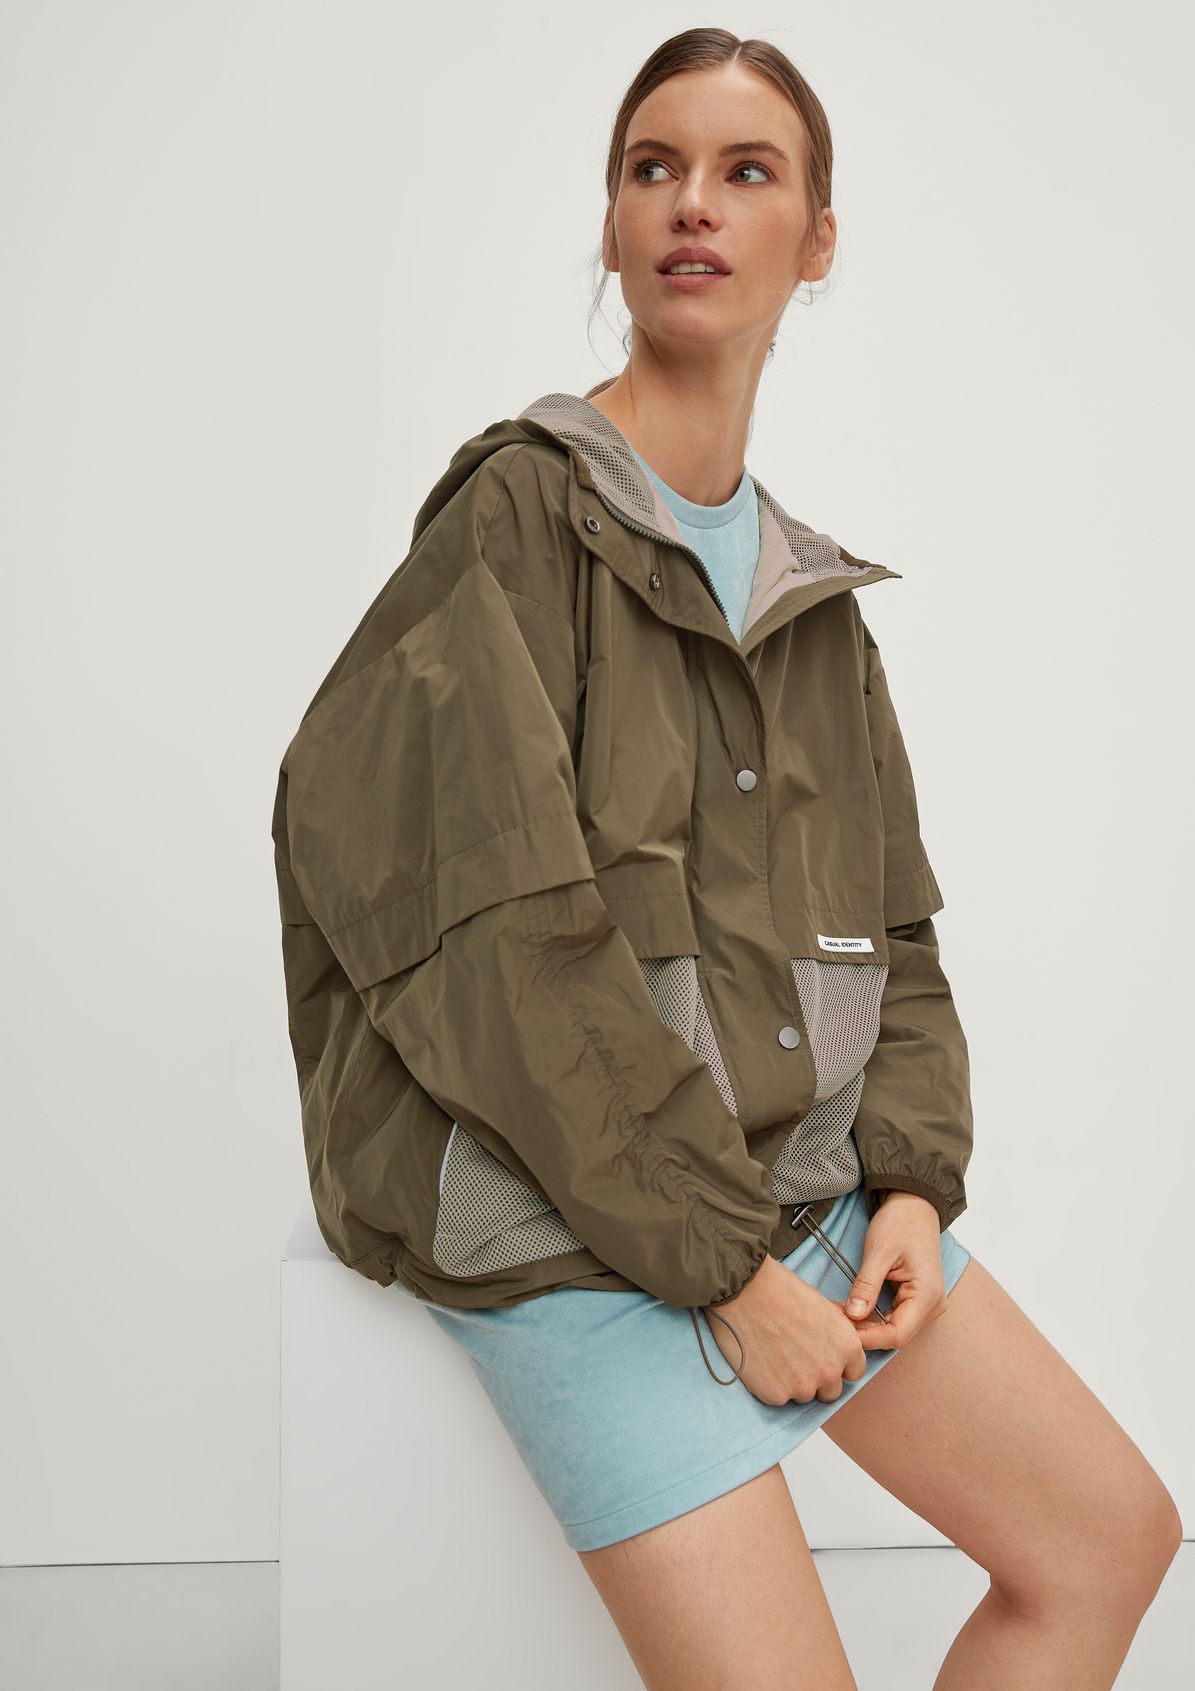 Loose-fitting bomber jacket with mesh details from comma